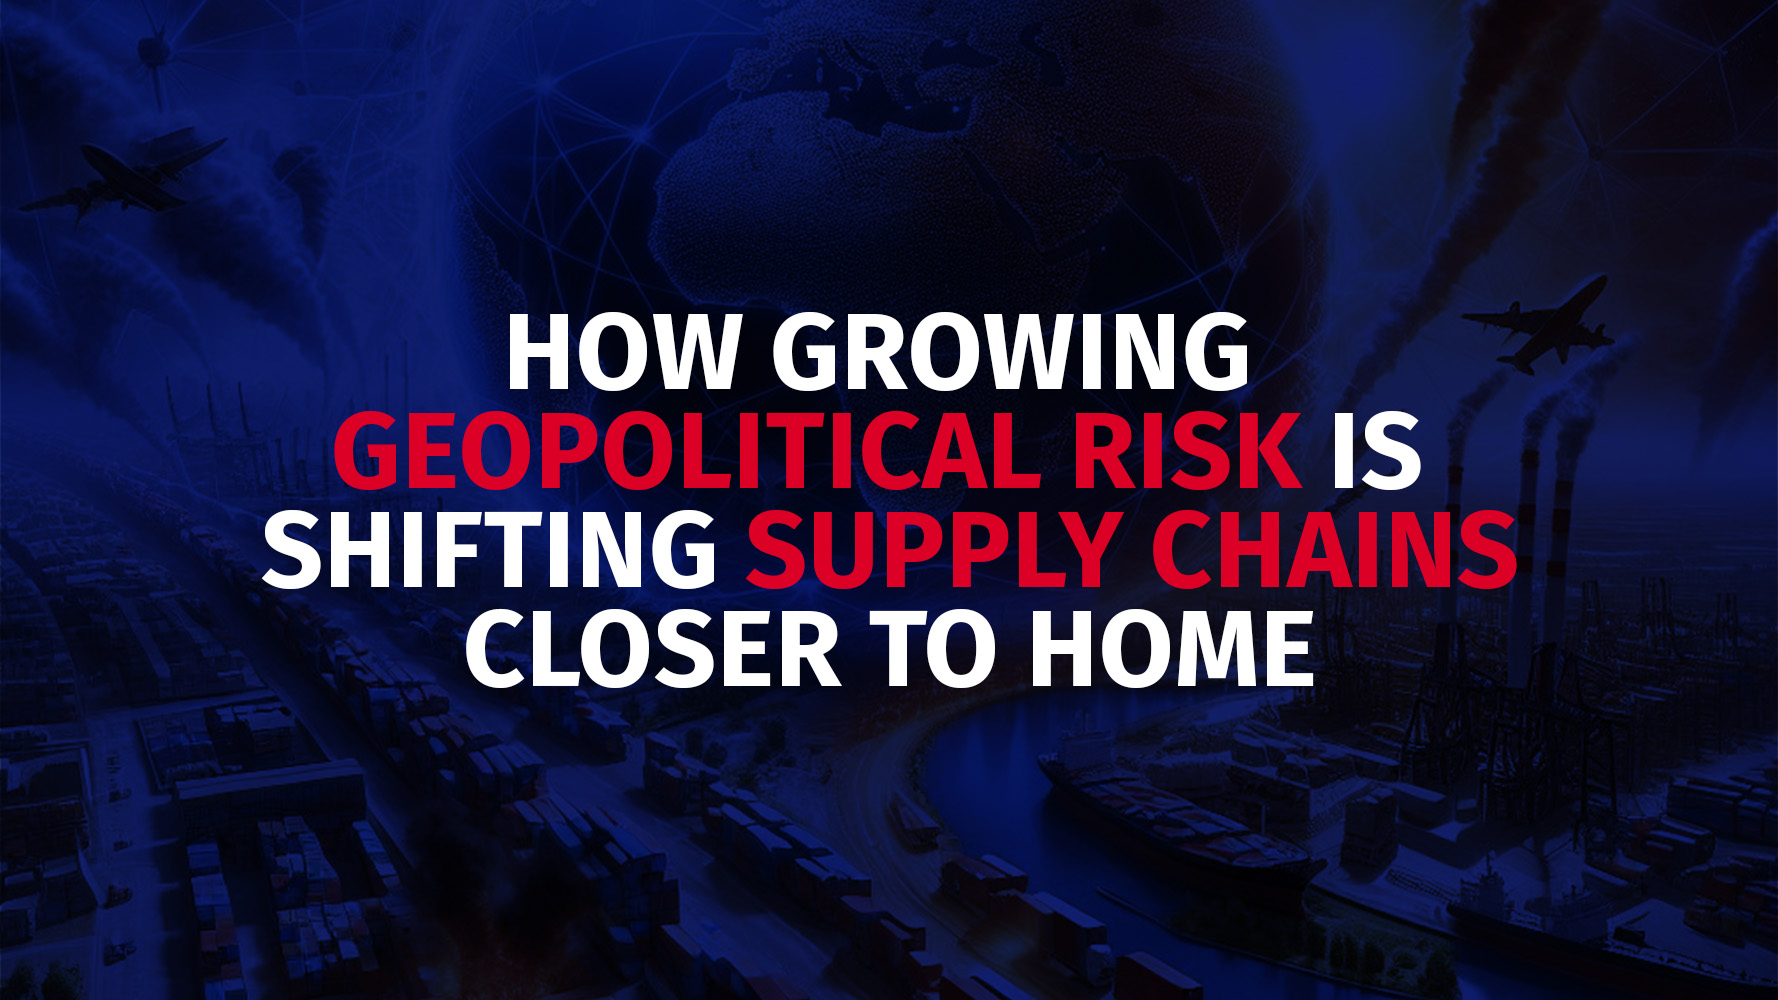 How growing geopolitical risk is shifting supply chains closer to home